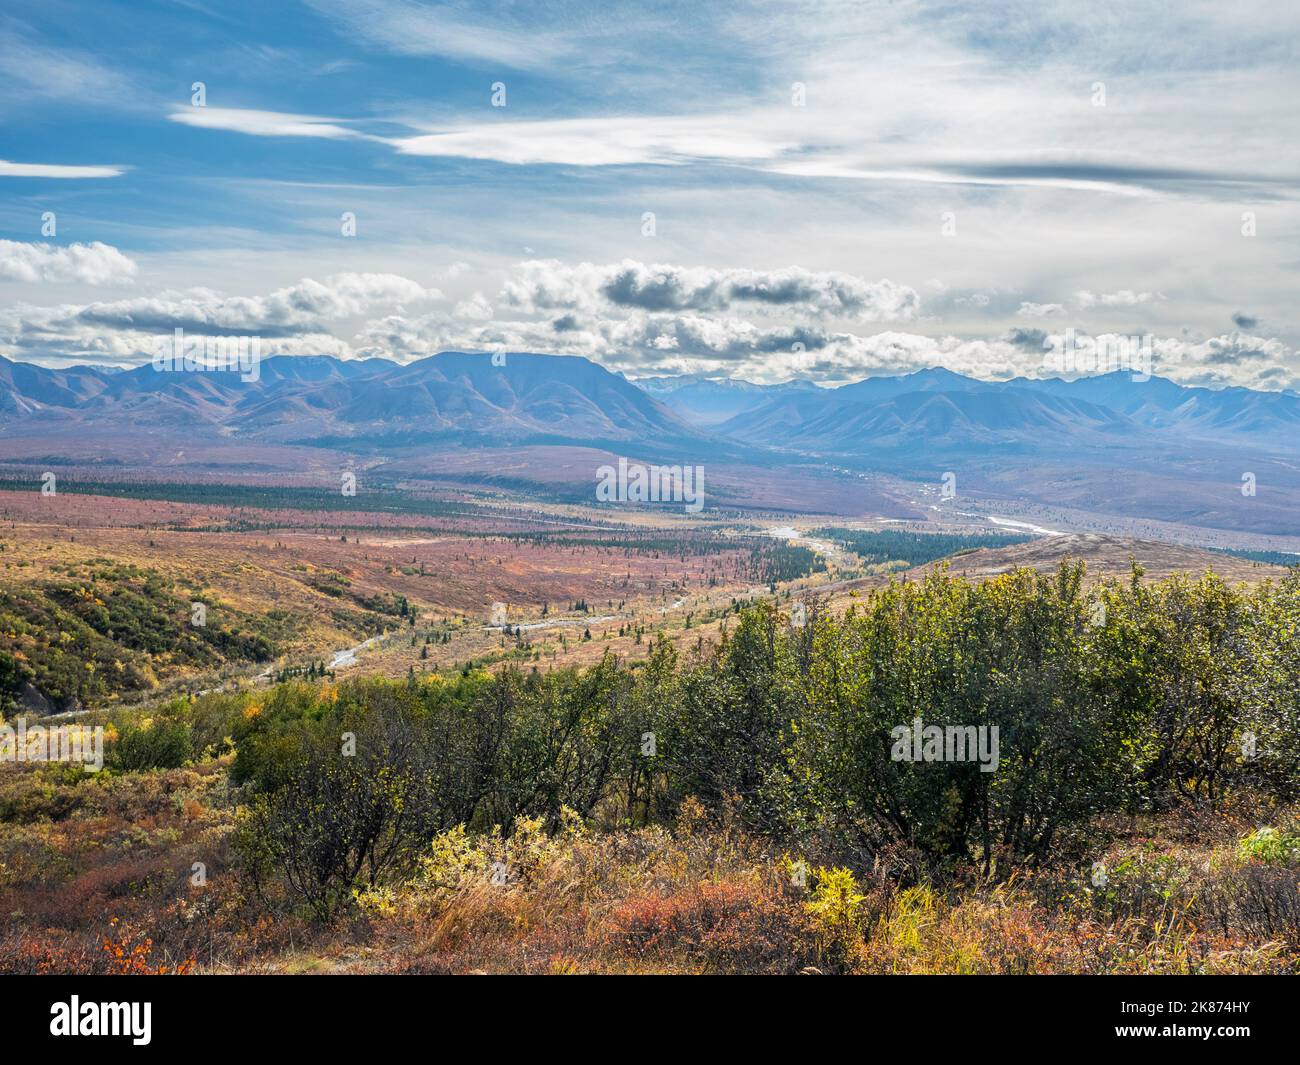 Fall color change amongst the trees and shrubs in Denali National Park, Alaska, United States of America, North America Stock Photo